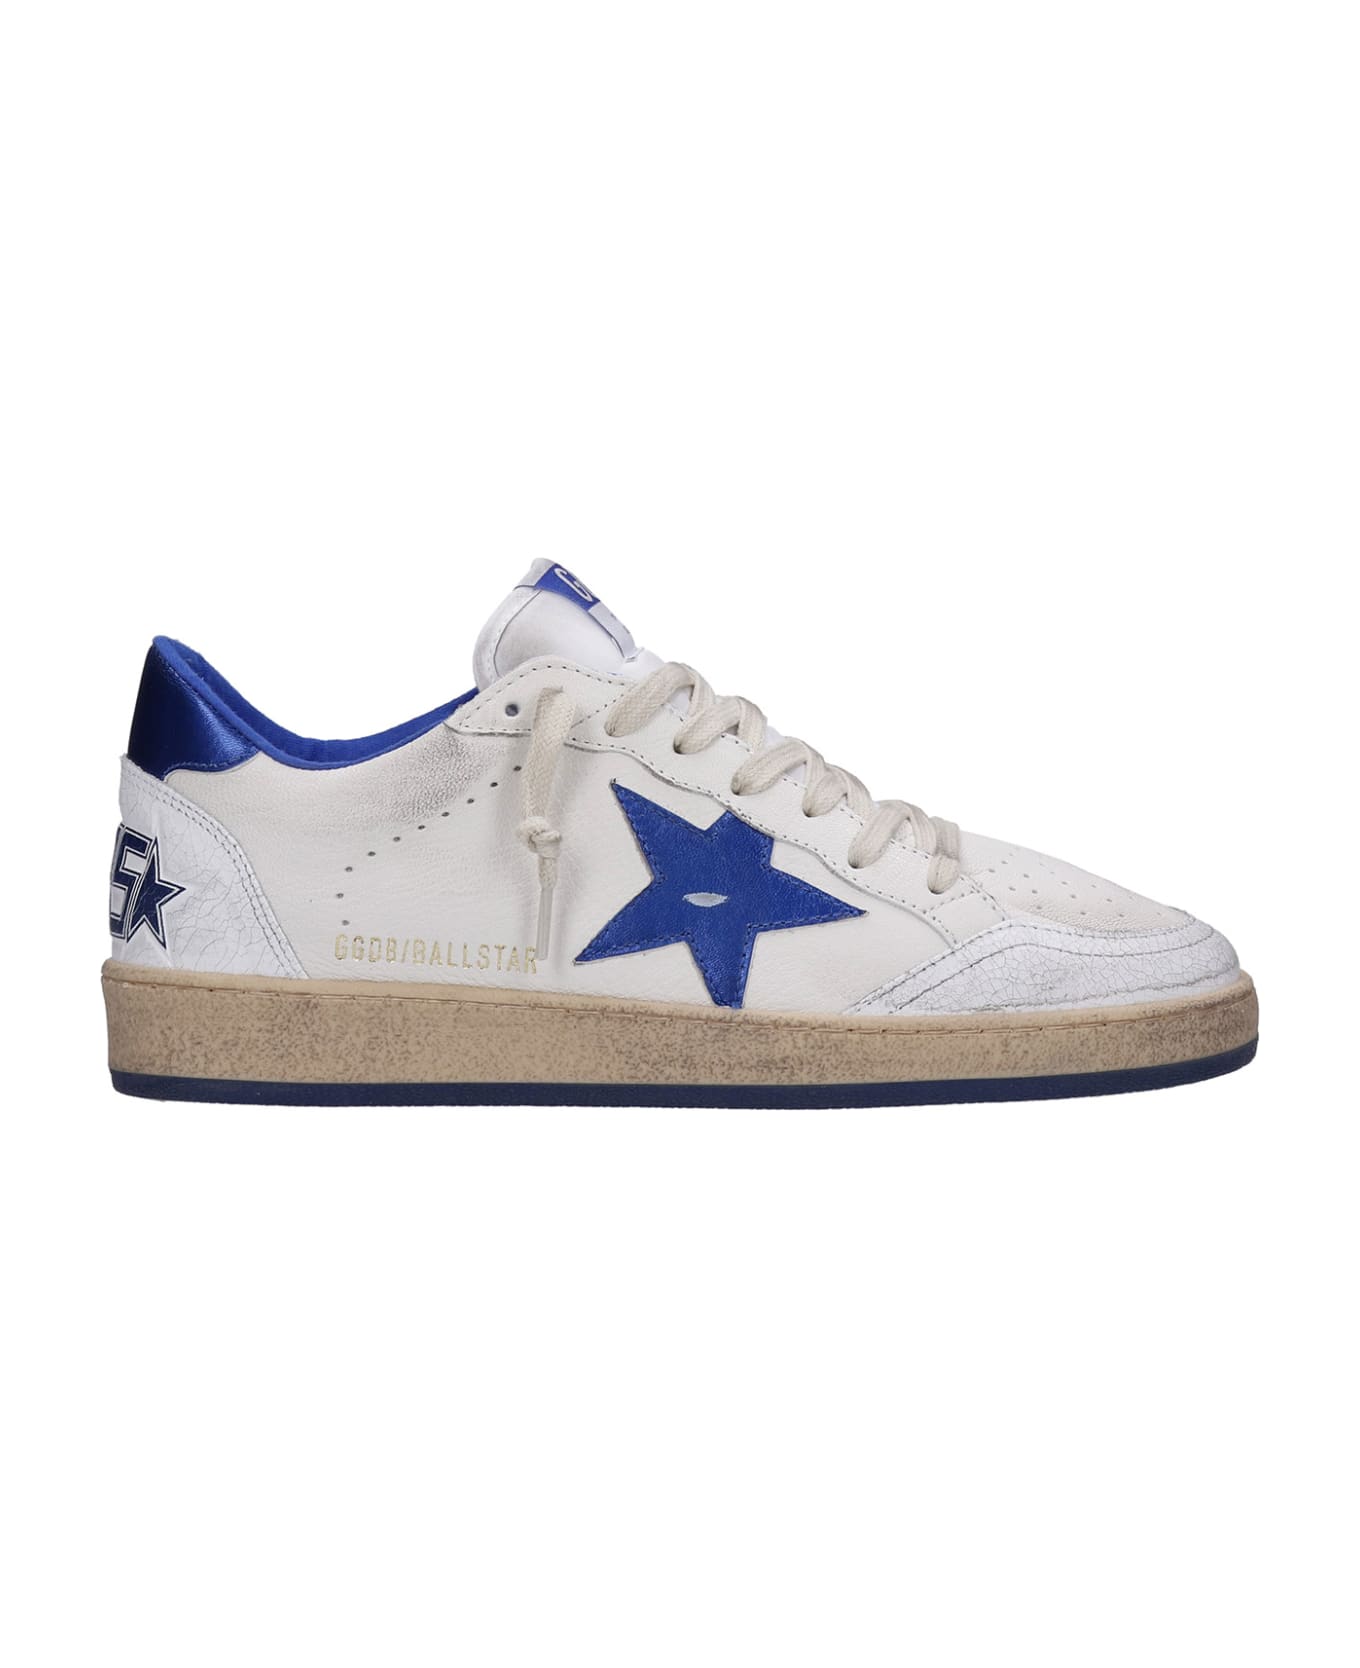 Golden Goose Ball Star Sneakers In White Leather - Bianco